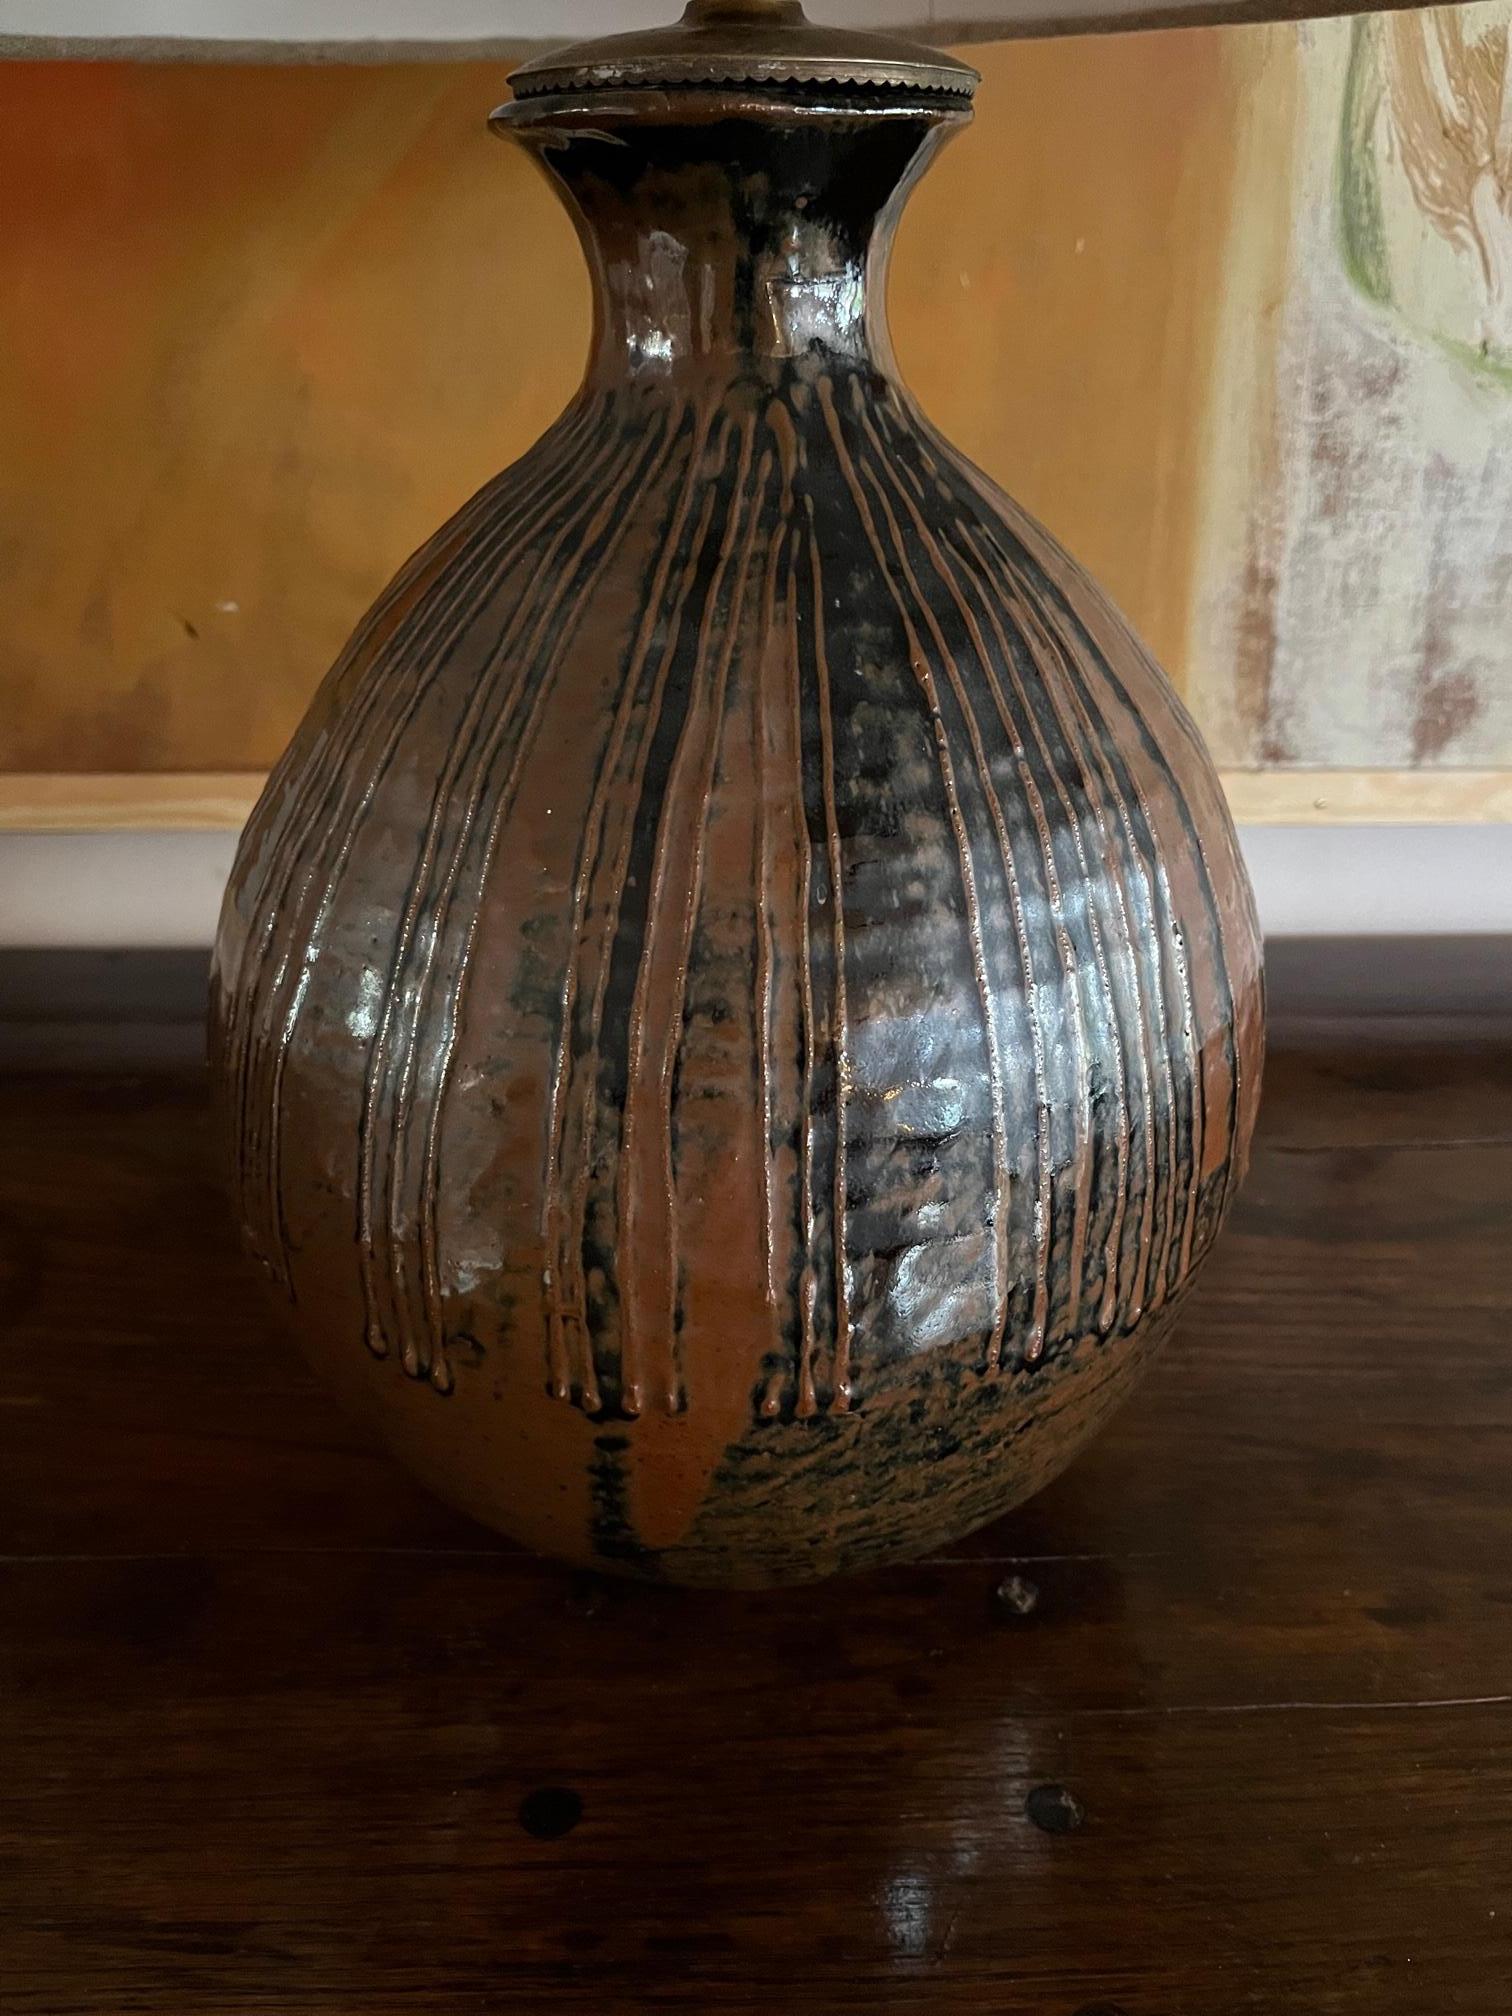 A heavy glazed ceramic, stoneware lamp. Brown with glazed black detail. There is a firing crack to the glaze and also a minor chip to the back of the lamp. This should be visible in one of the photos. The shade is used for display and not included.